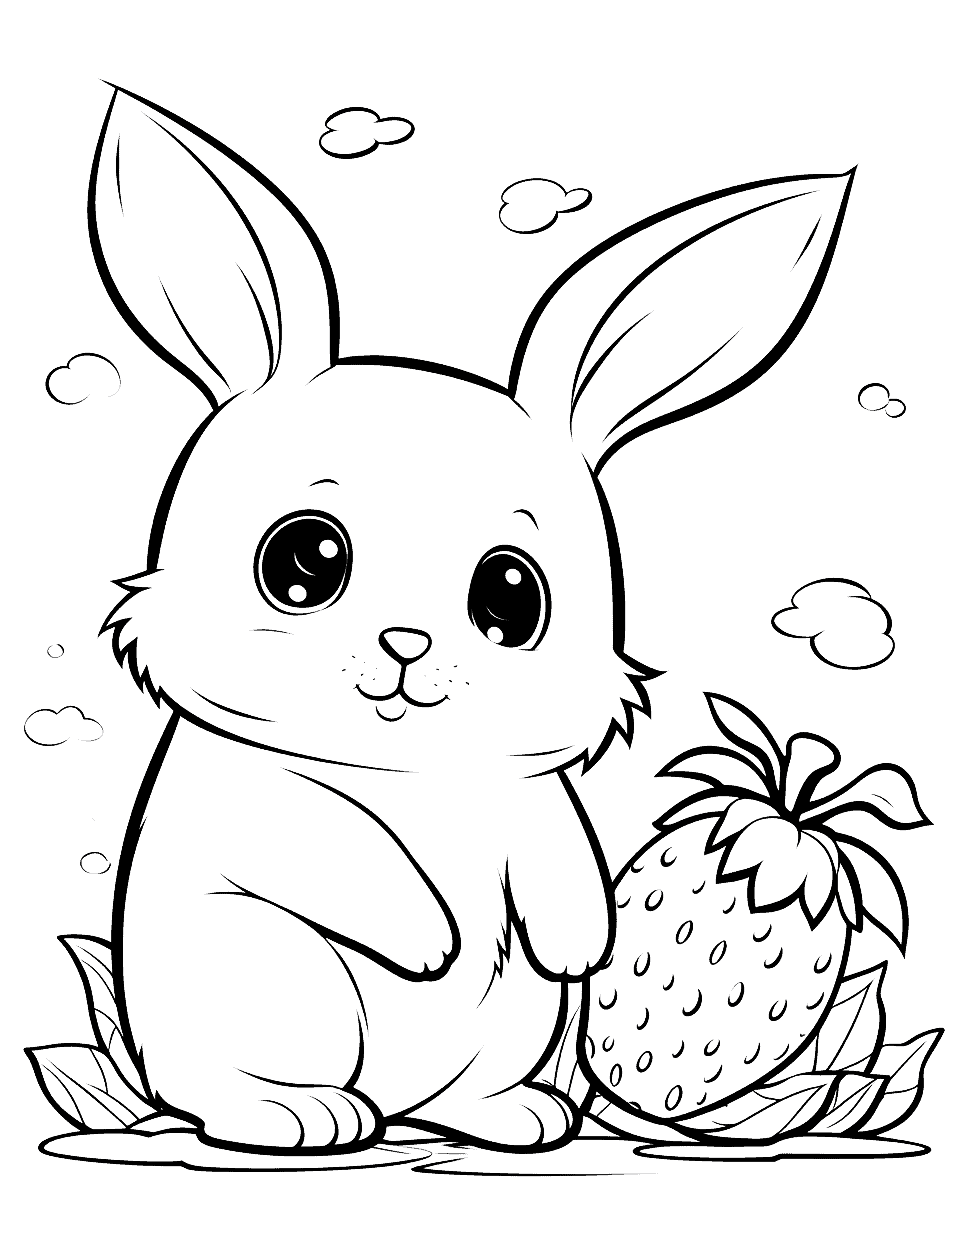 Chibi Bunny and the Giant Strawberry Coloring Page - A scene where a chibi bunny is in awe of a strawberry that’s almost as big as it!